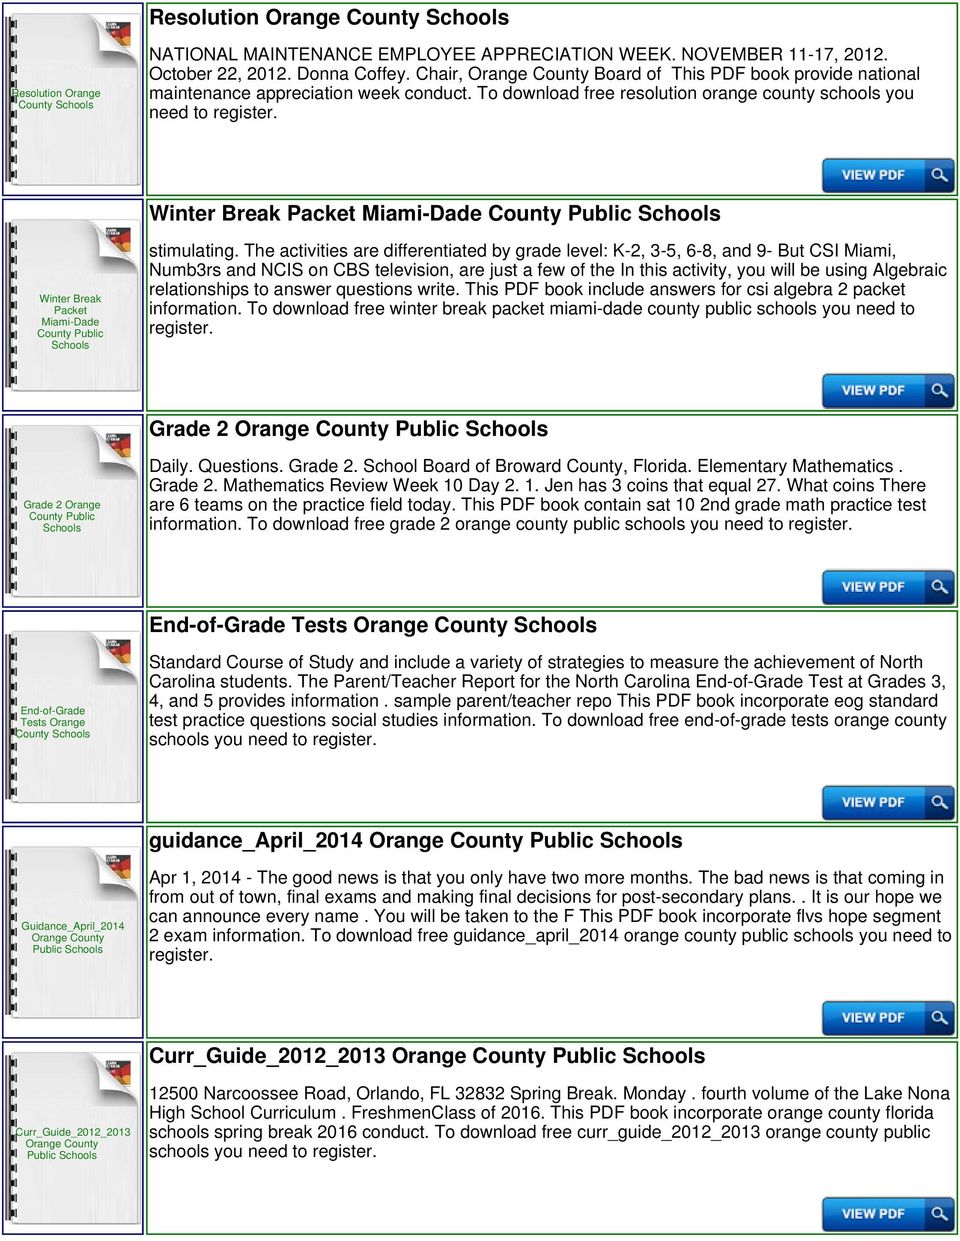 To download free resolution orange county schools you need to Winter Break Packet Miami-Dade County Winter Break Packet Miami-Dade stimulating.